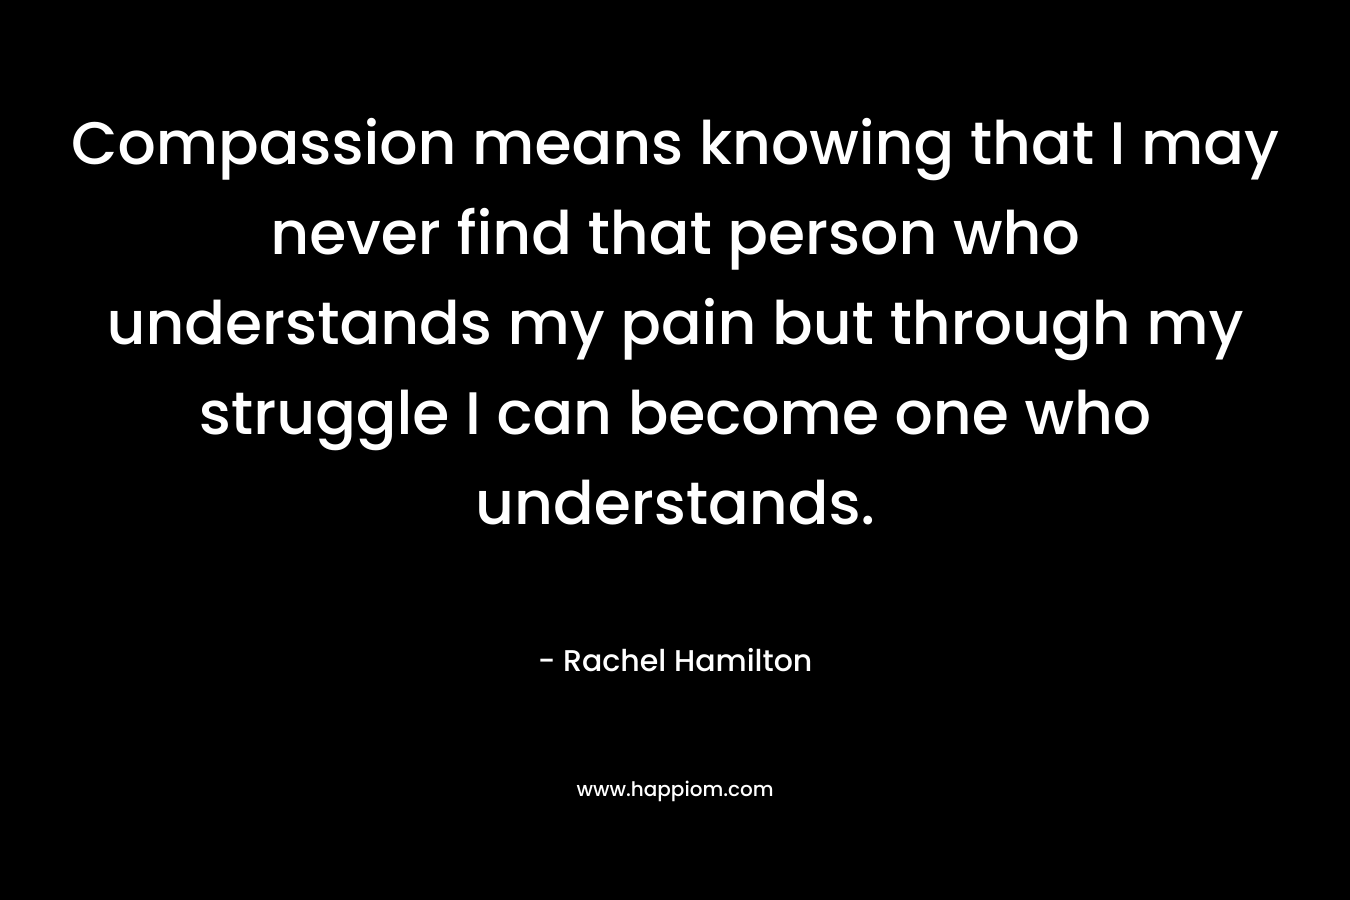 Compassion means knowing that I may never find that person who understands my pain but through my struggle I can become one who understands.